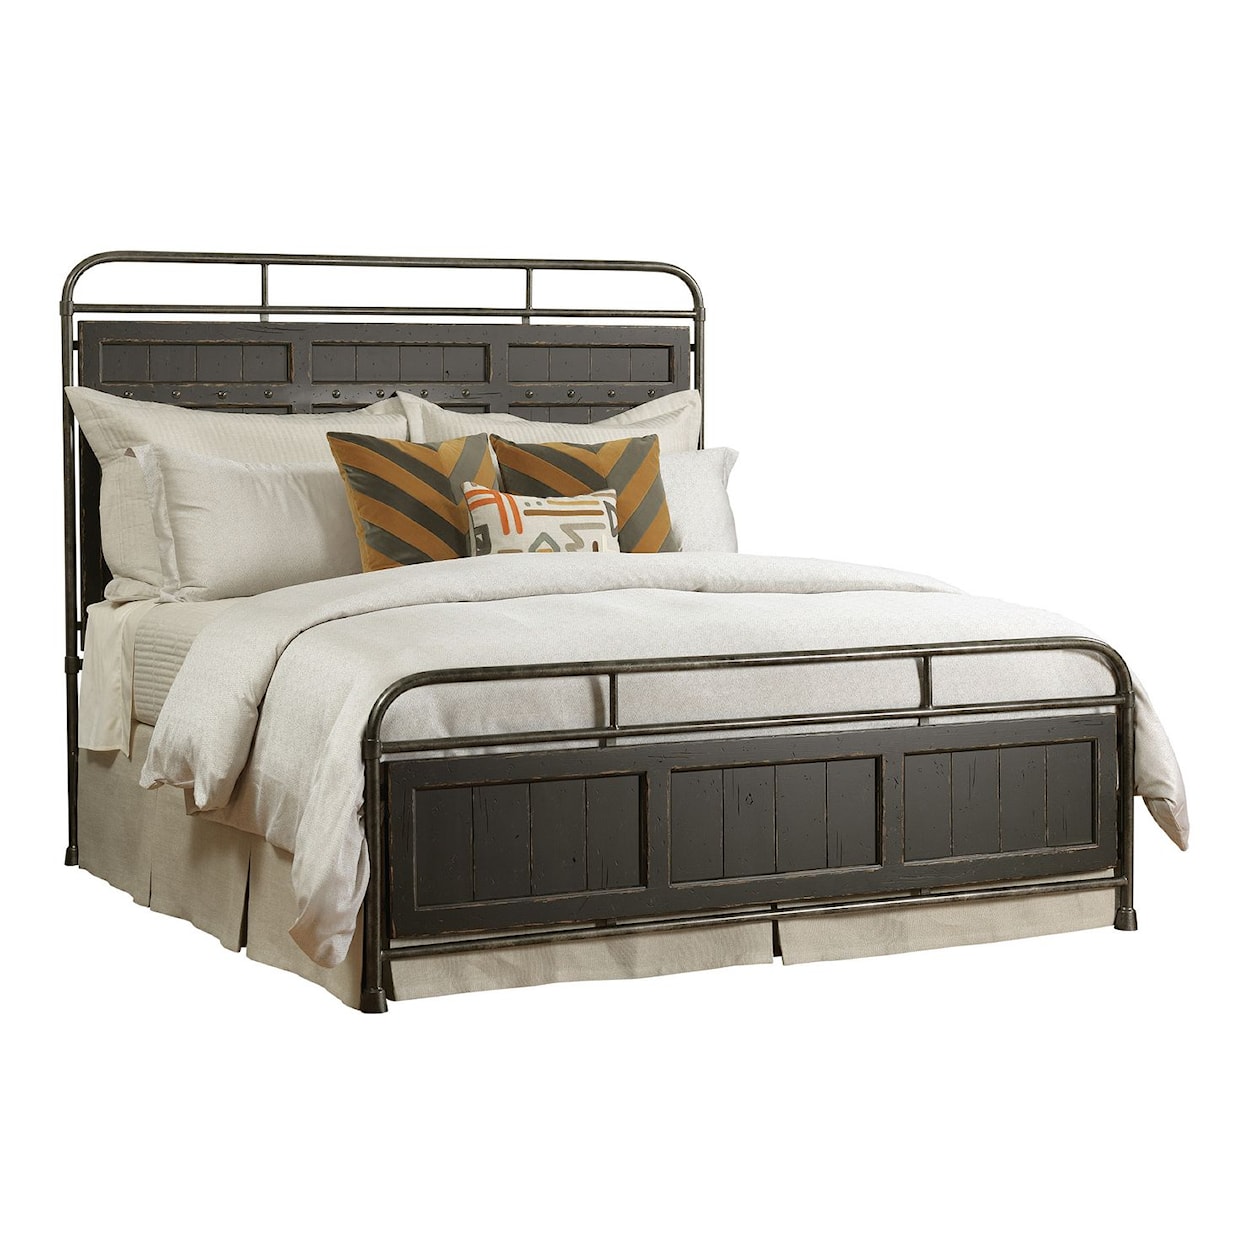 Kincaid Furniture Mill House Folsom Queen Metal Bed